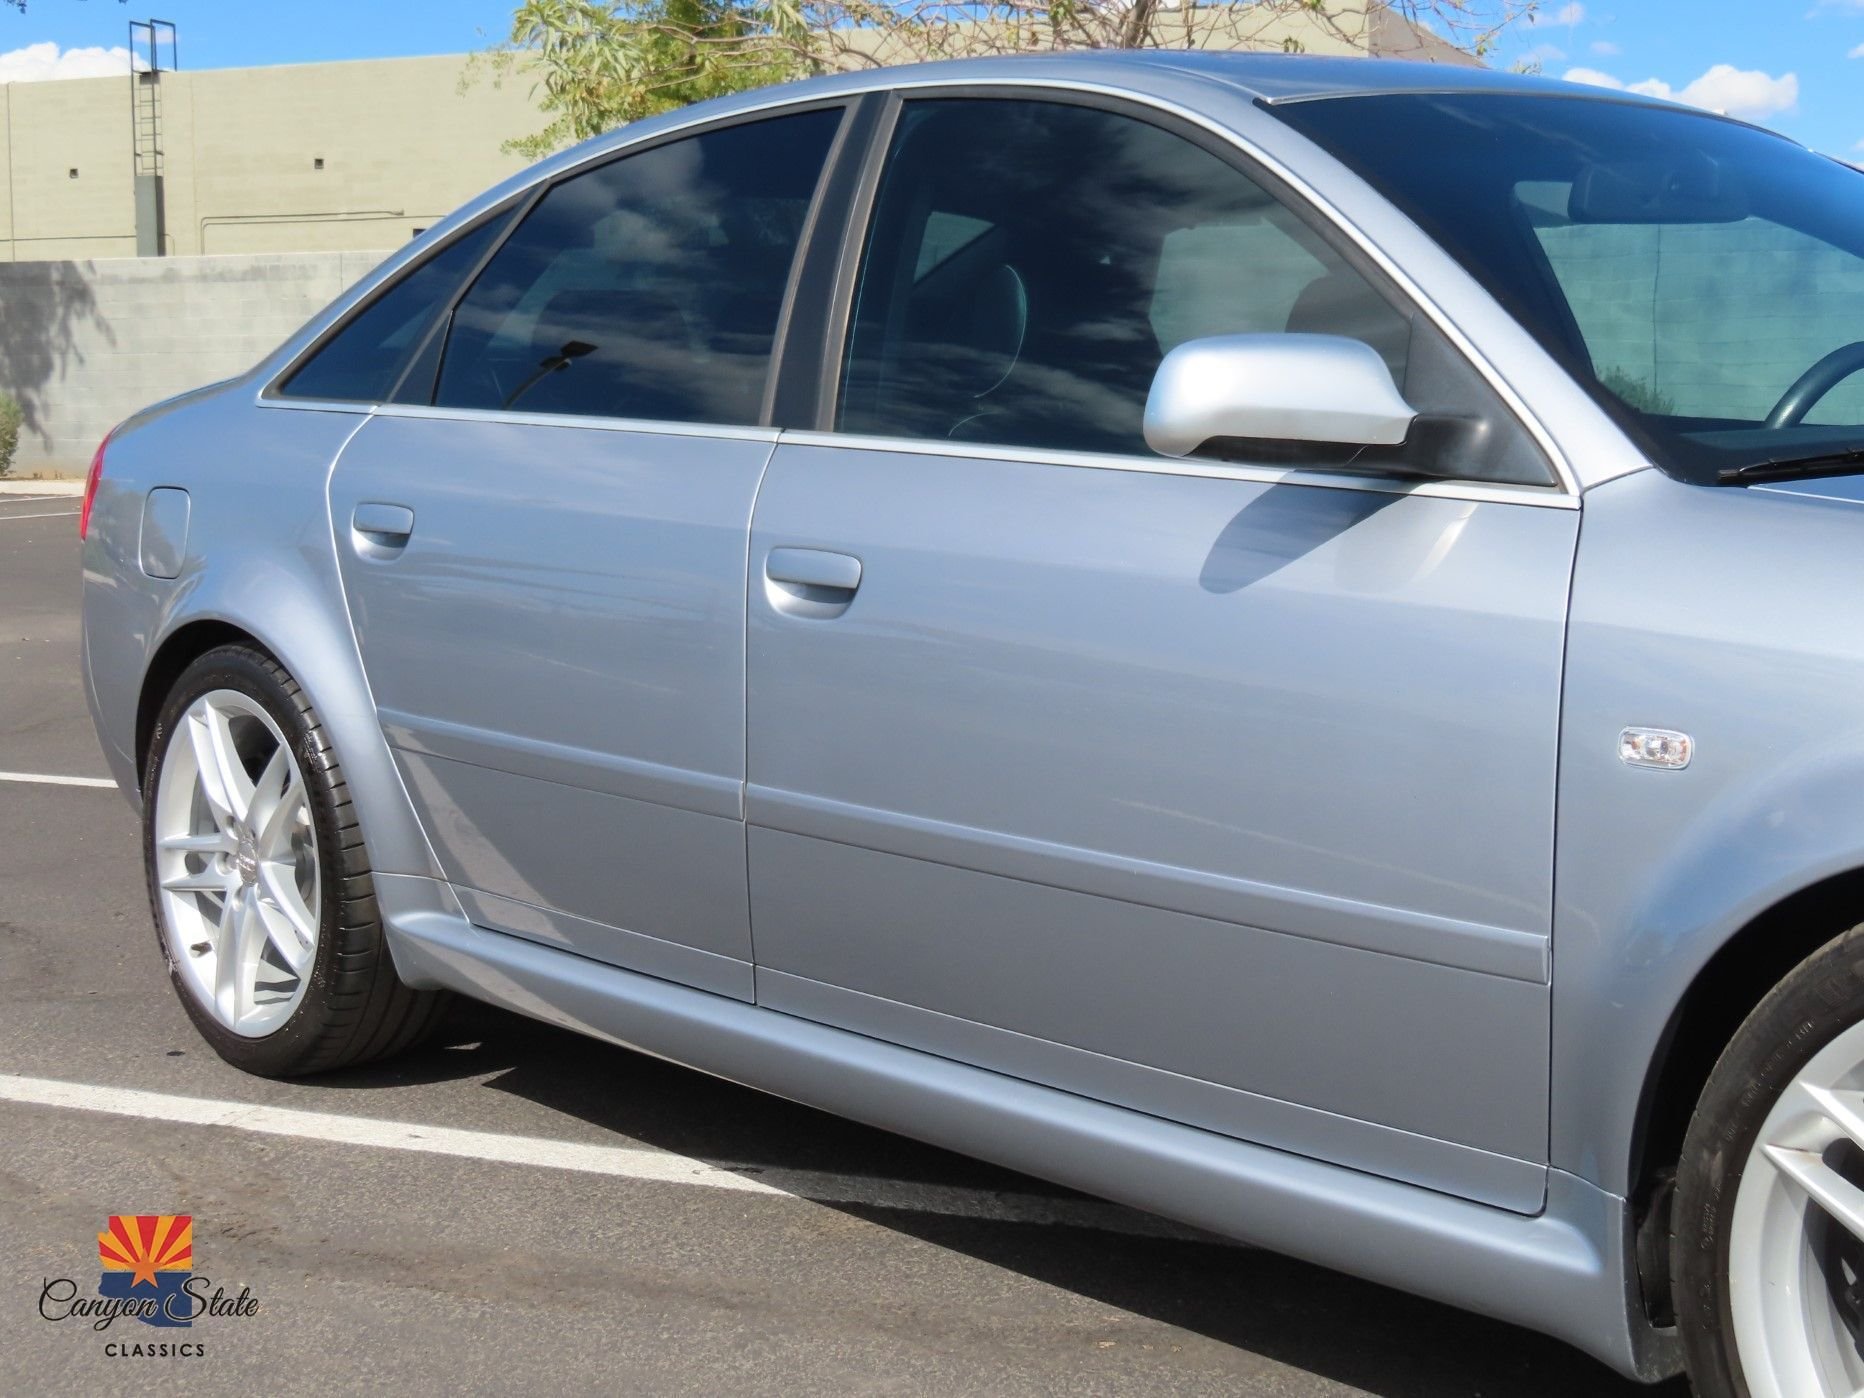 2003   Audi RS6 4dr Sdn 4.2L quattro AWD - Canyon State Classics